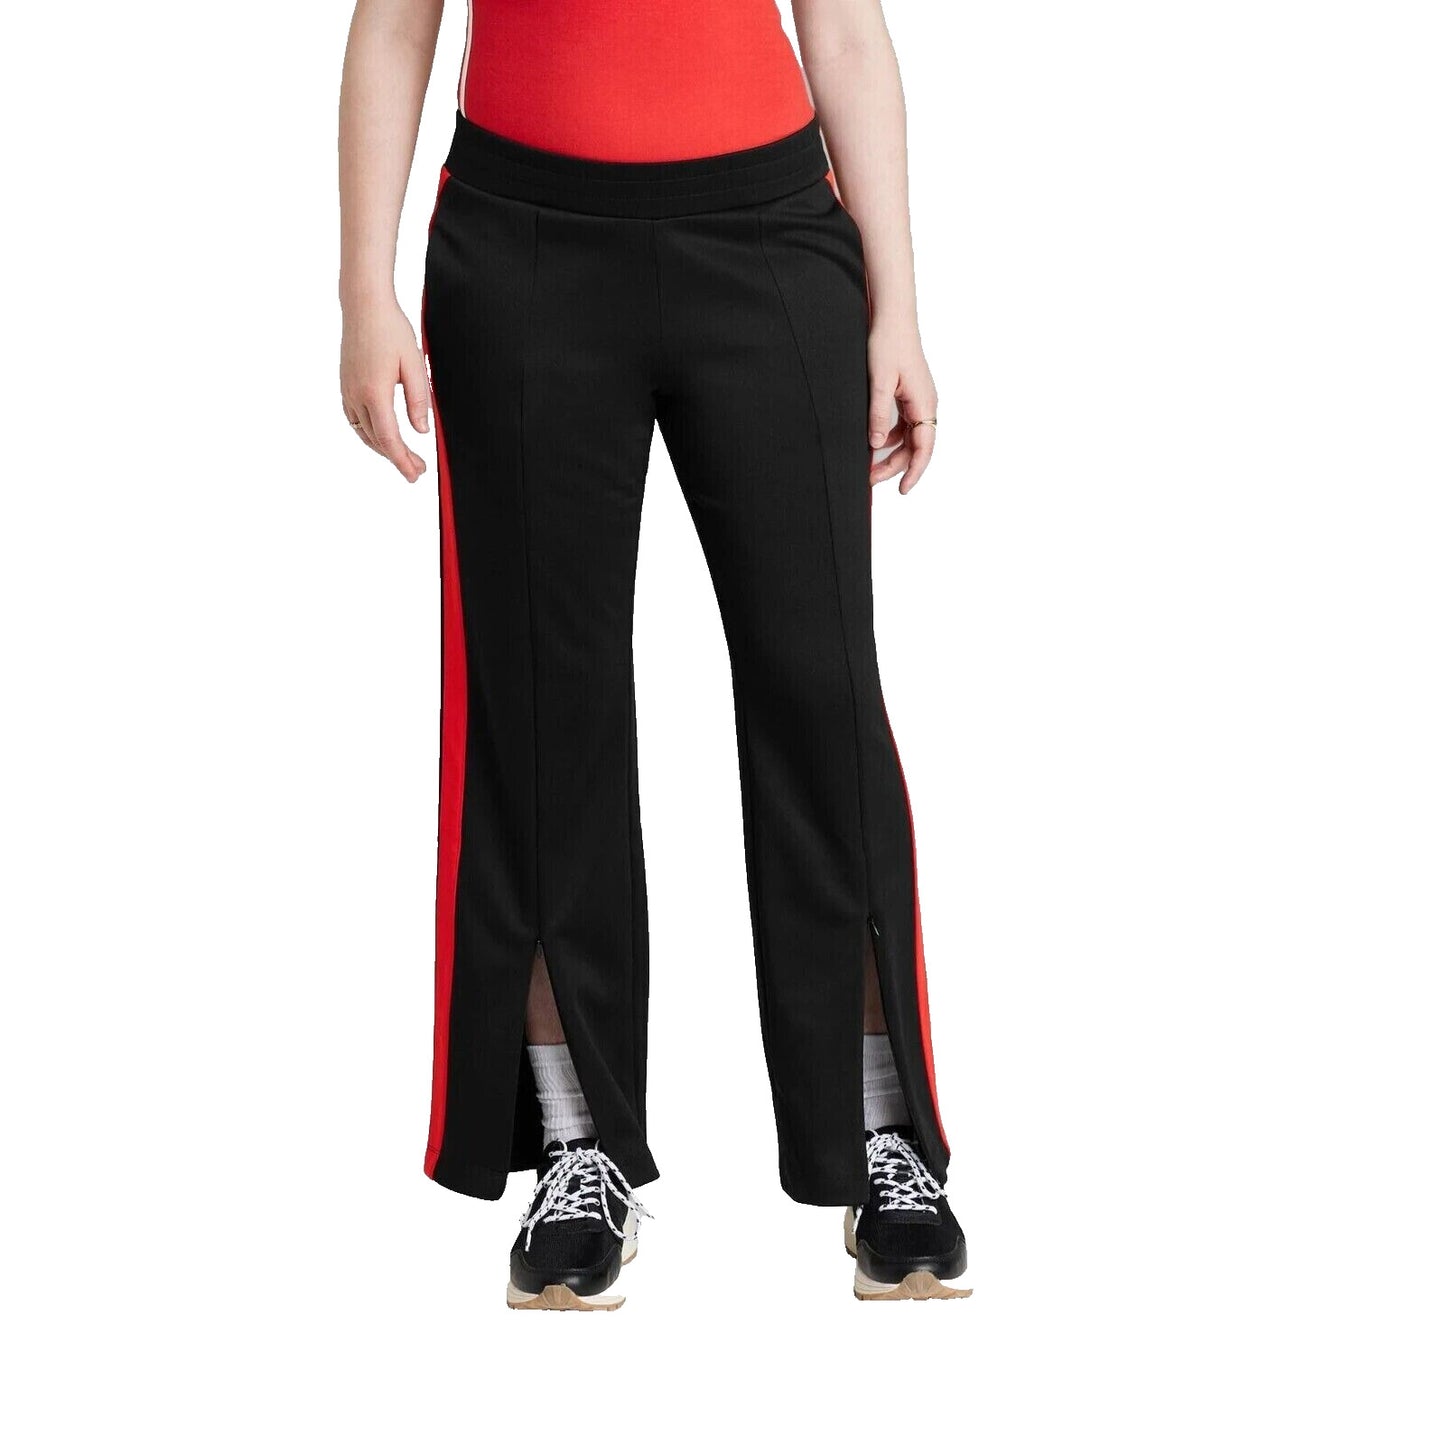 Women's High Rise Track Pants Wild Fable Black S